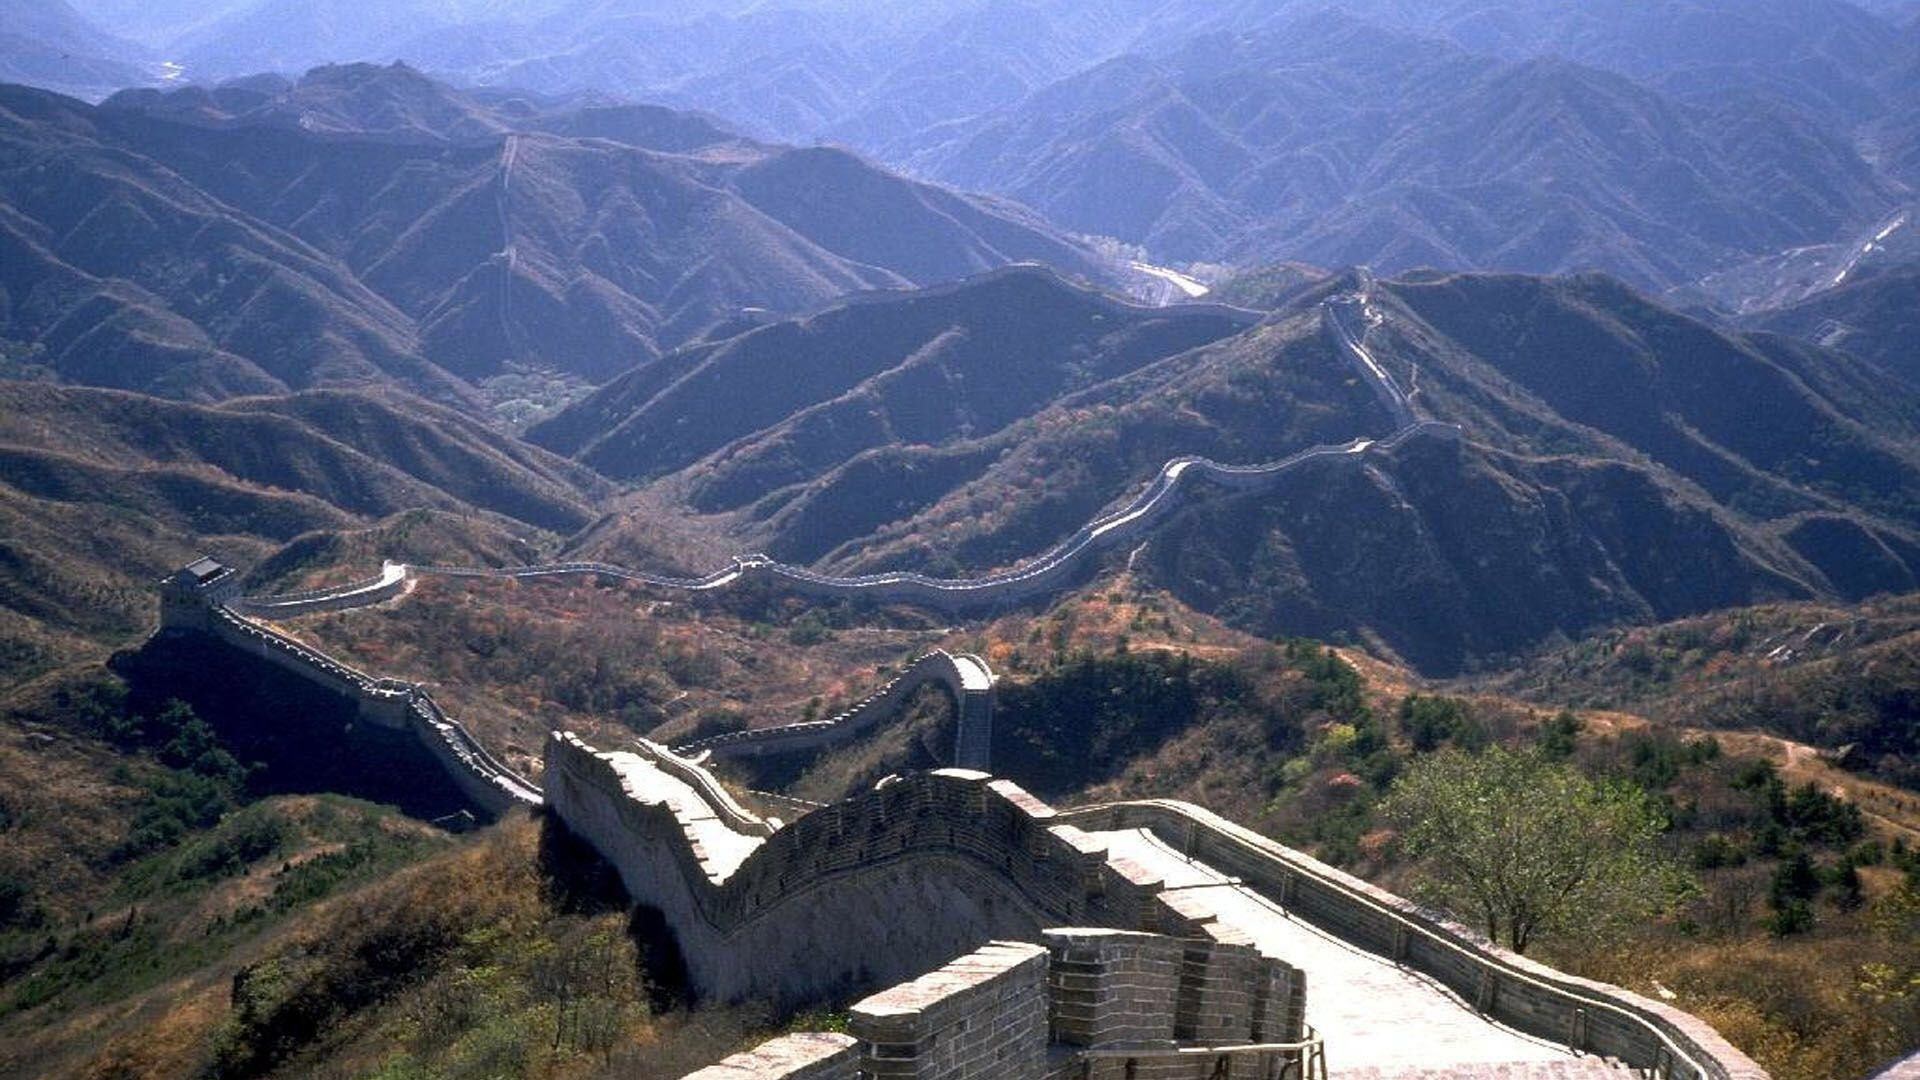 1920x1080 Full View Of Great Wall Of China Wallpaper